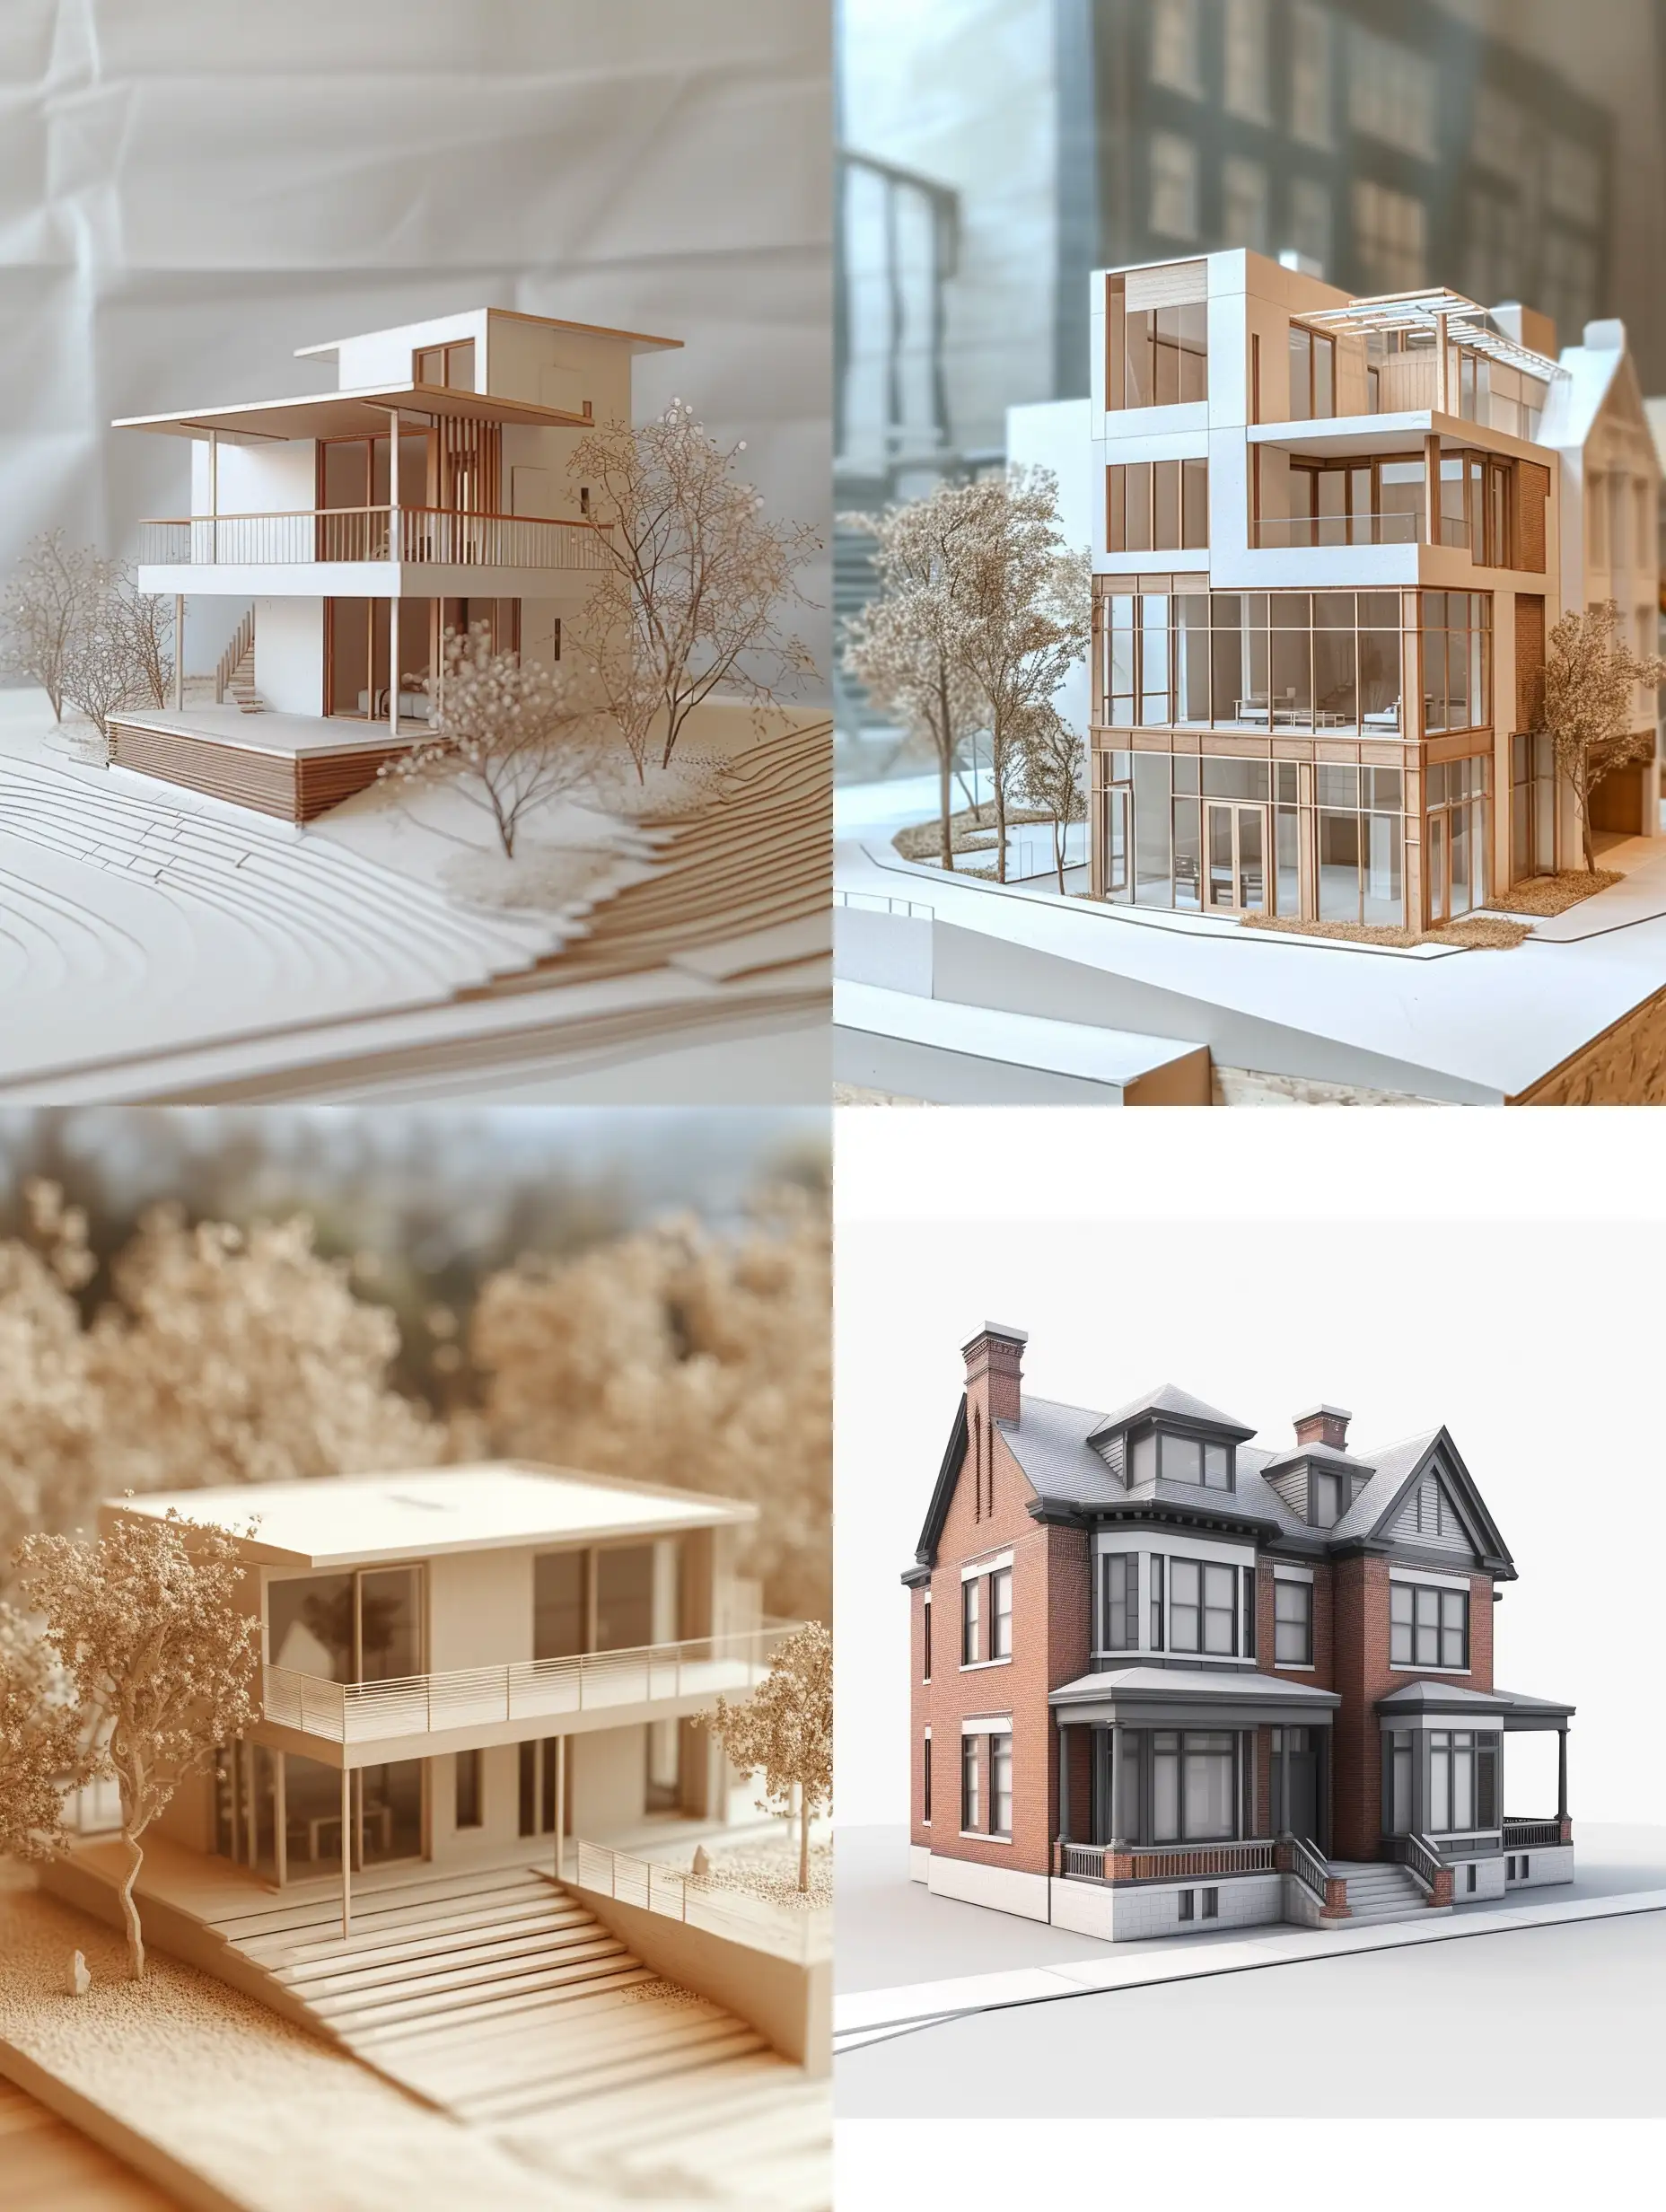 model of house before render near model of house after render